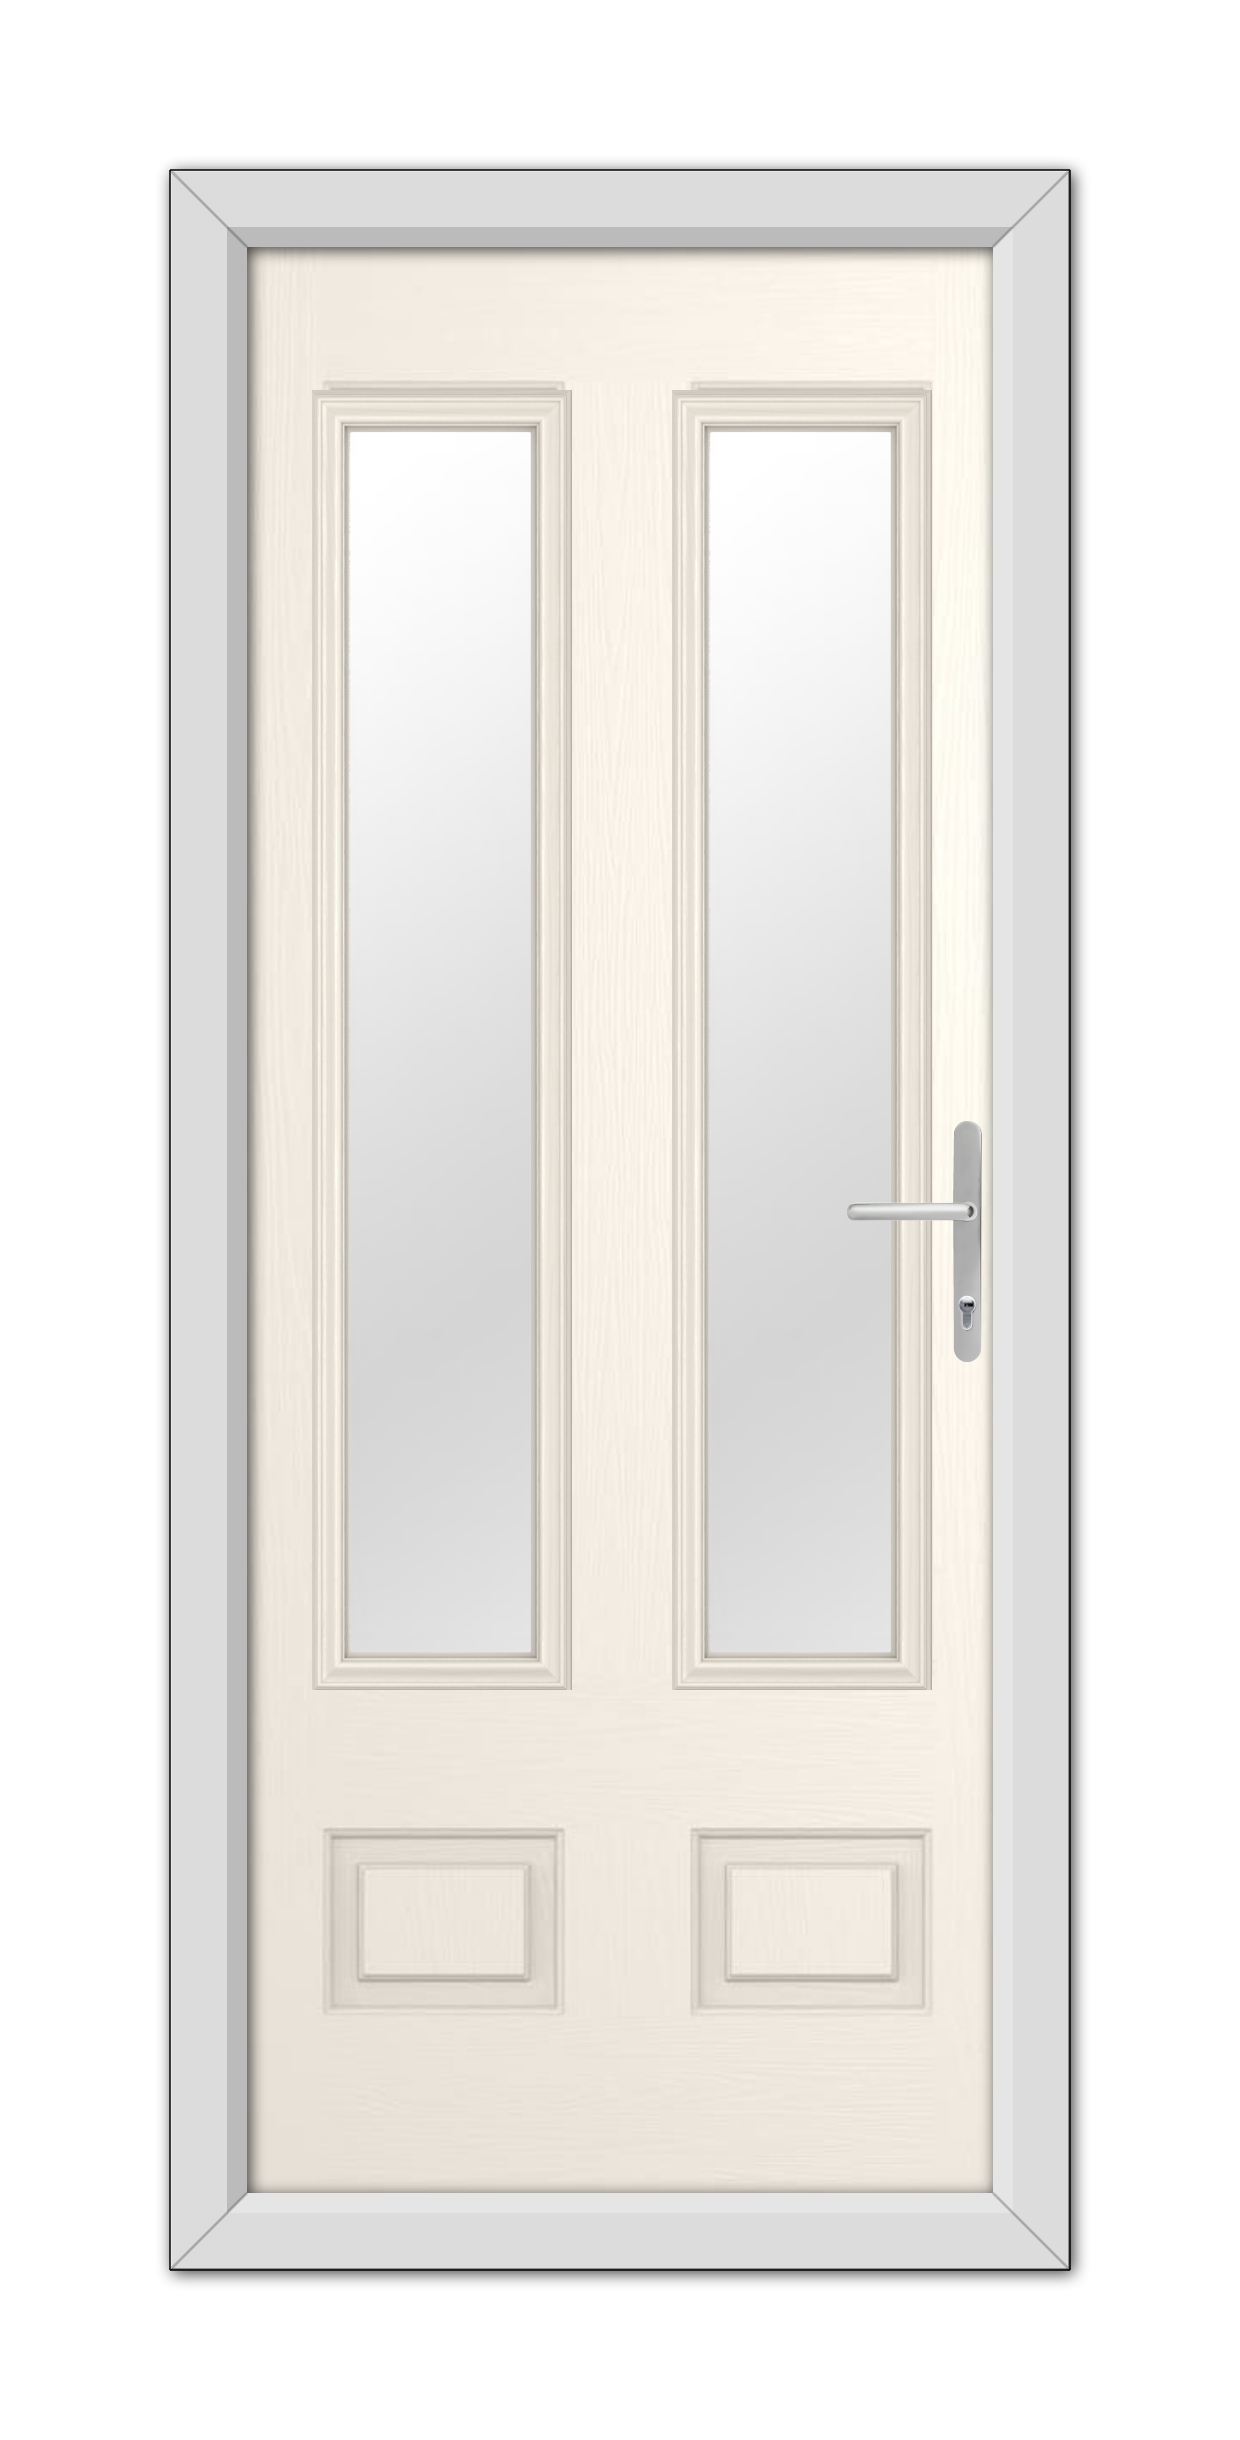 White Foil Aston Glazed 2 Composite Door 48mm Timber Core with frosted glass and a silver handle, set in a light gray frame.